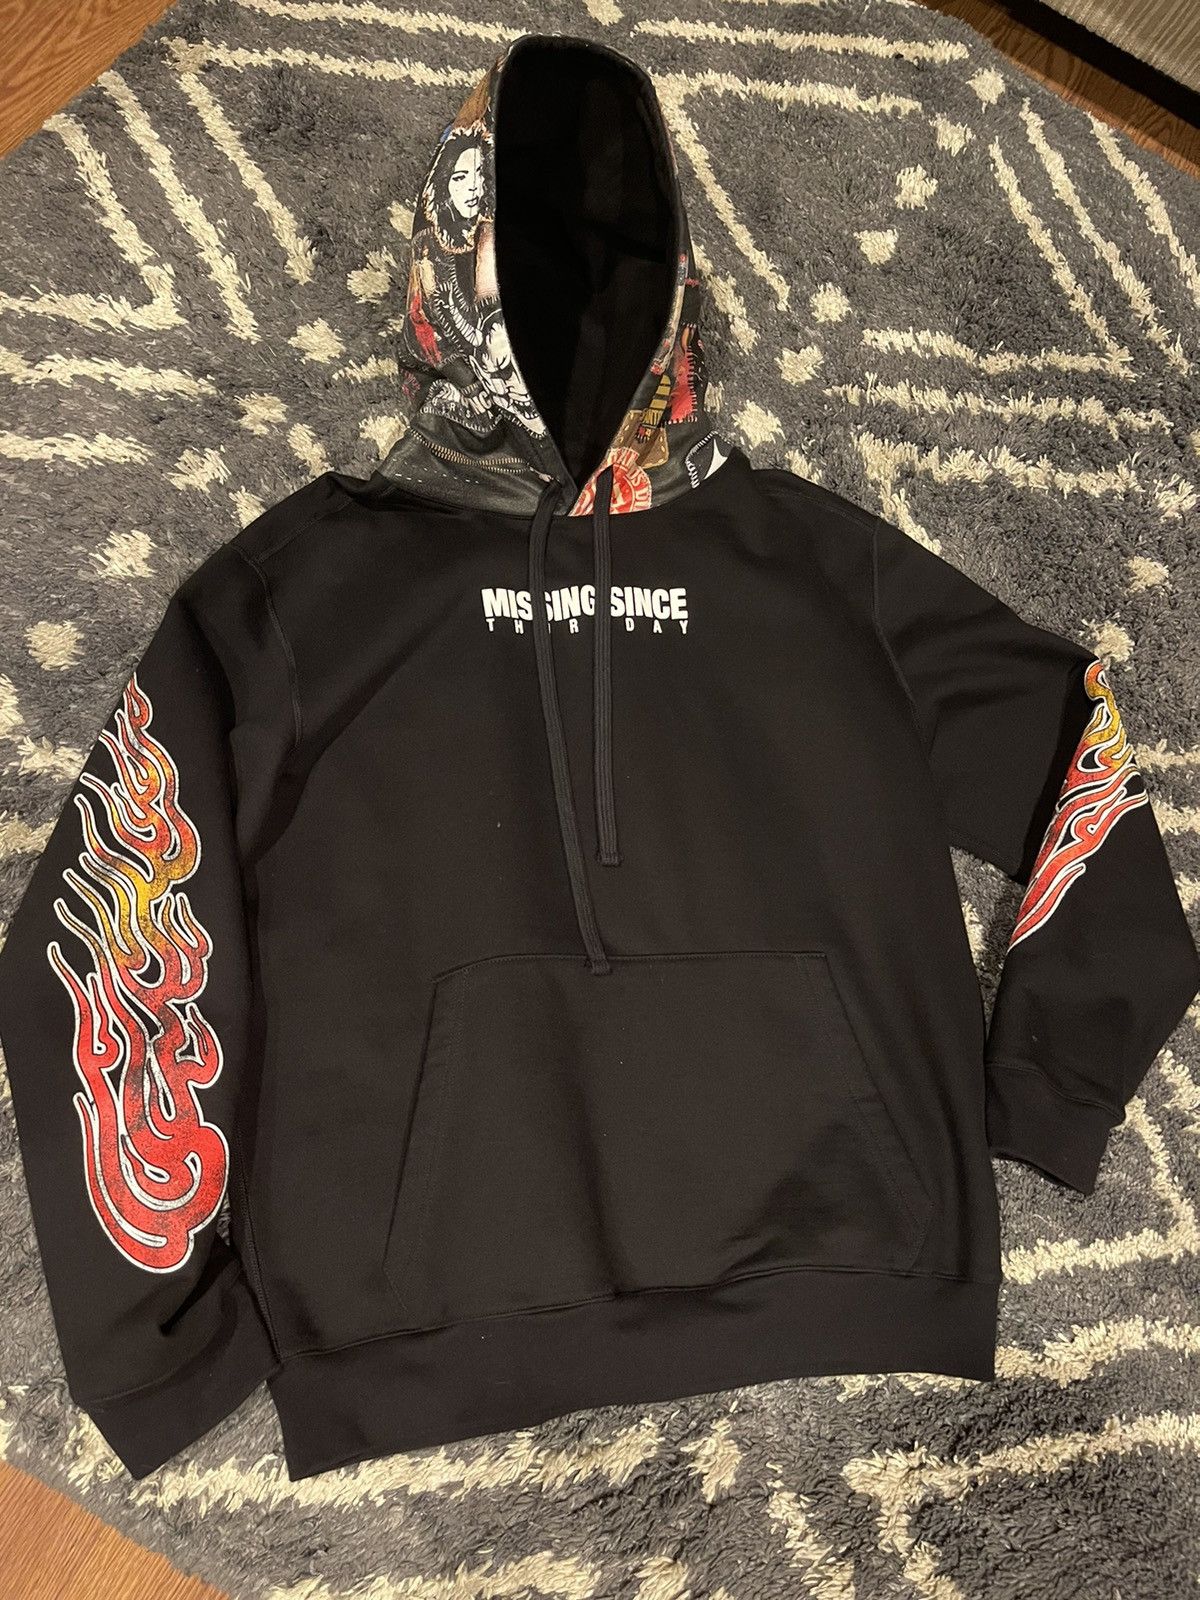 Missing Since Thursday Hoodie | Grailed